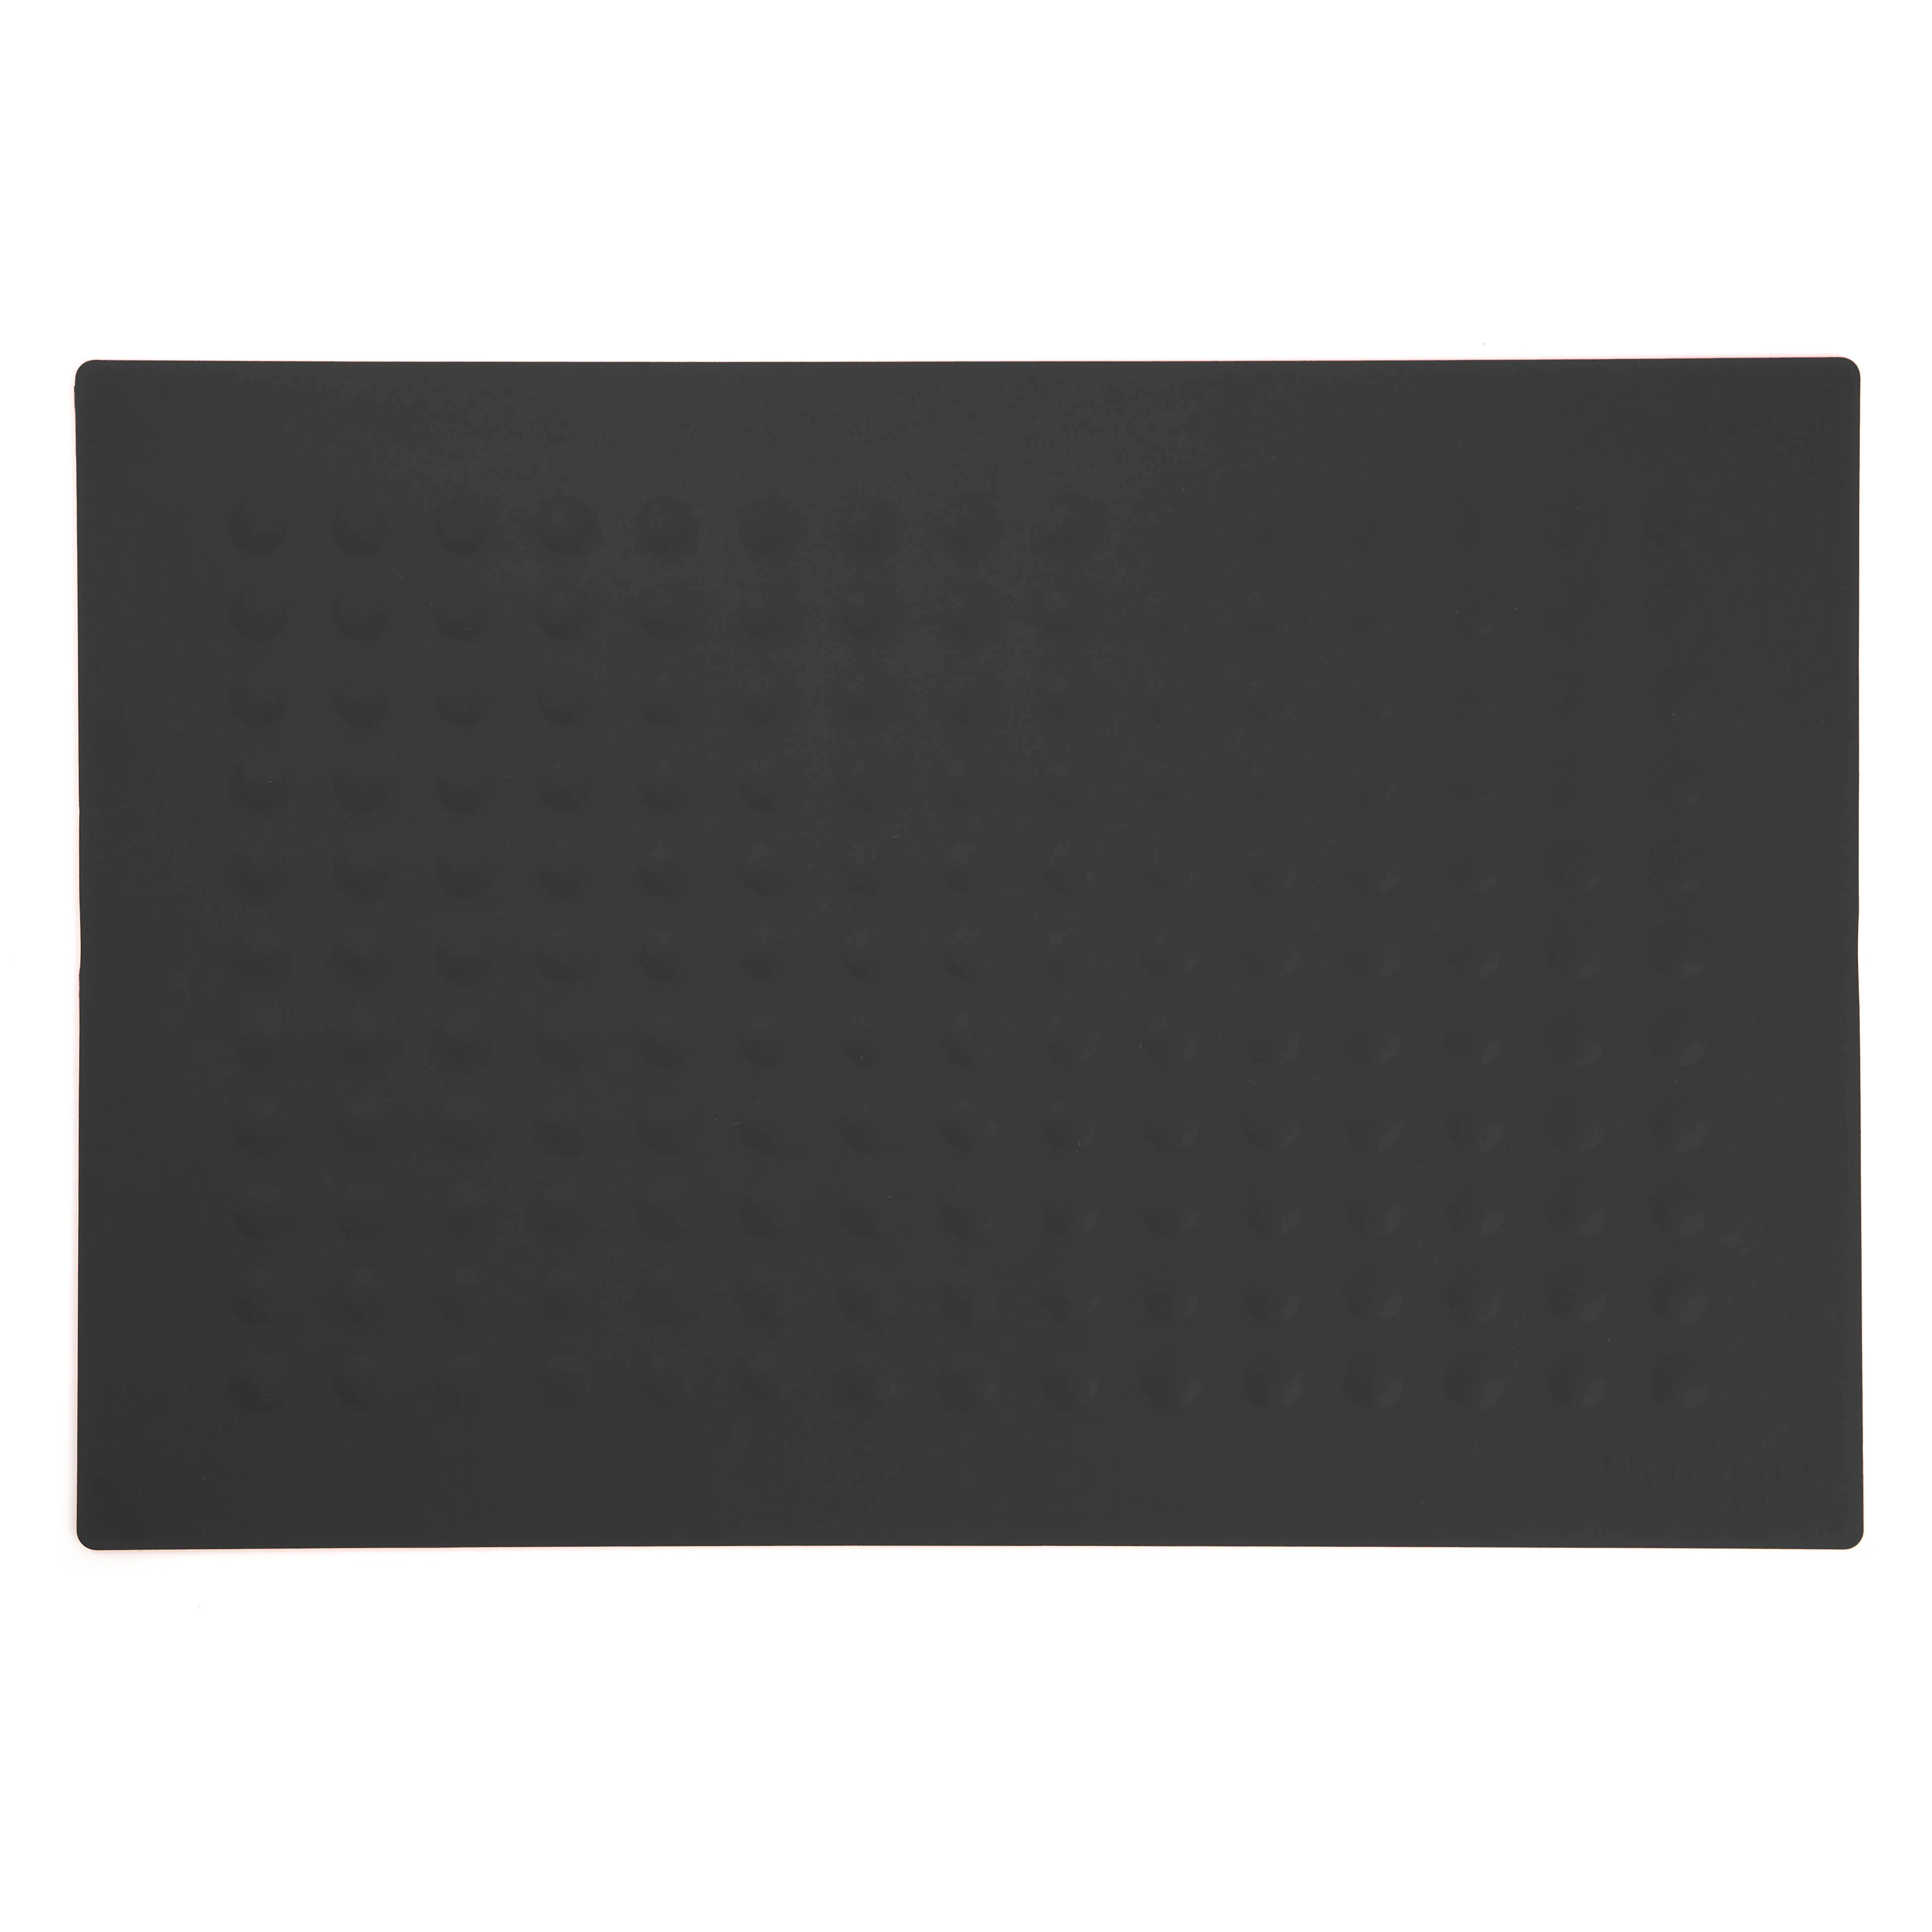 Bubbles Dog Food and Water Placemat, Black